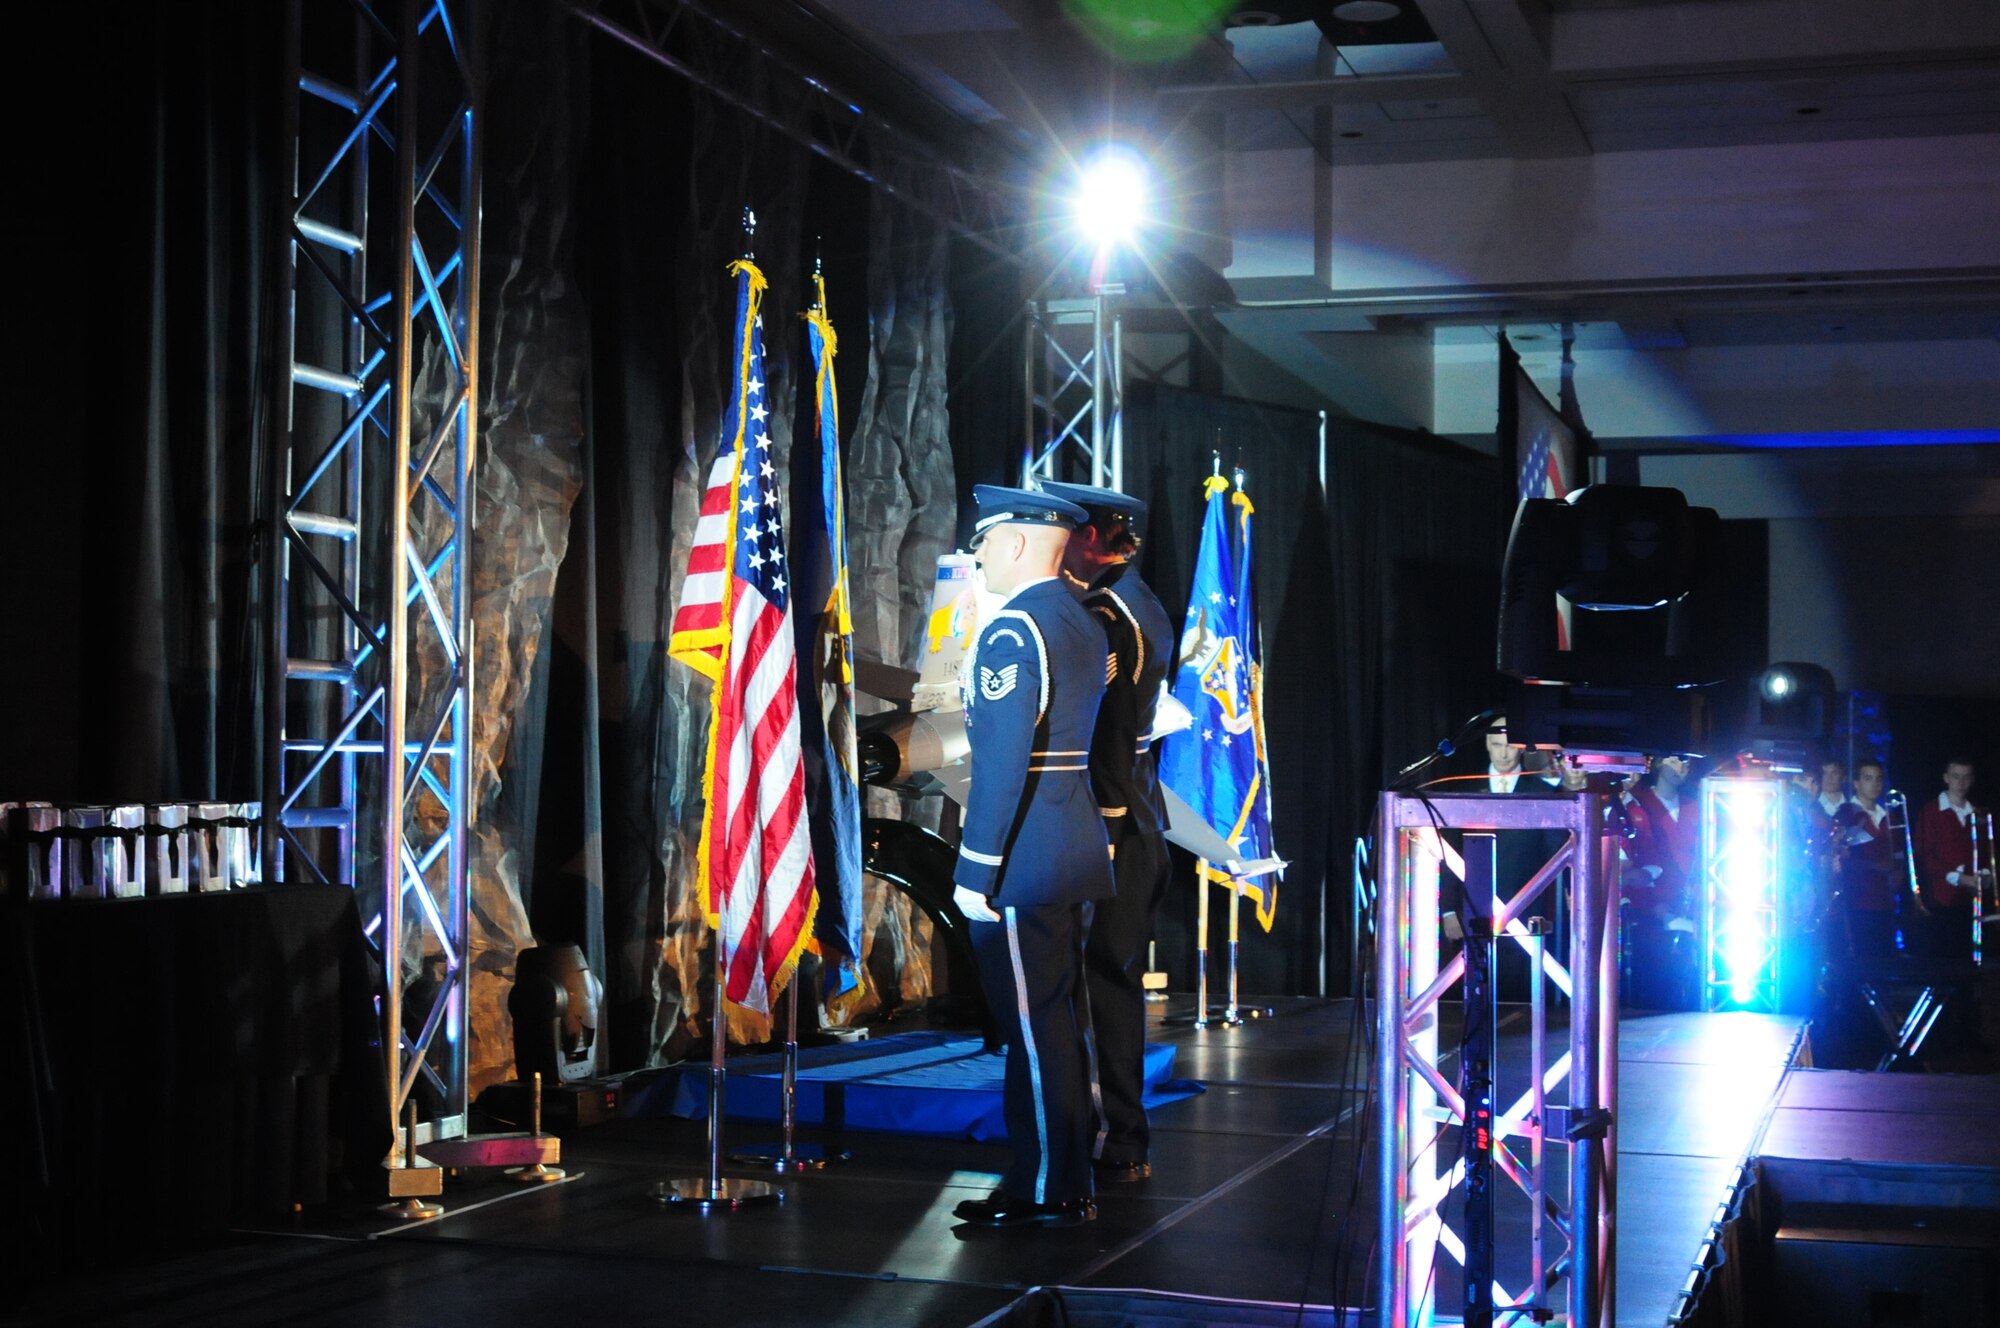 Technical Sergeant Julie Ault and Technical Sergeant Joel Patterson post the colors at the start of the annual Chamber of Commerce Dinner and Gala held on Oct. 21, 2010 at the Duluth Entertainment and Convention Center in Duluth, Minn.  The event featured General Craig McKinley, chief of the National Guard Bureau, as the keynote speaker.  He spoke highly of 148th Fighter Wings accomplishments and the communities' positive support of military members.    (U.S. Air Force photo by SSgt Donald Acton)